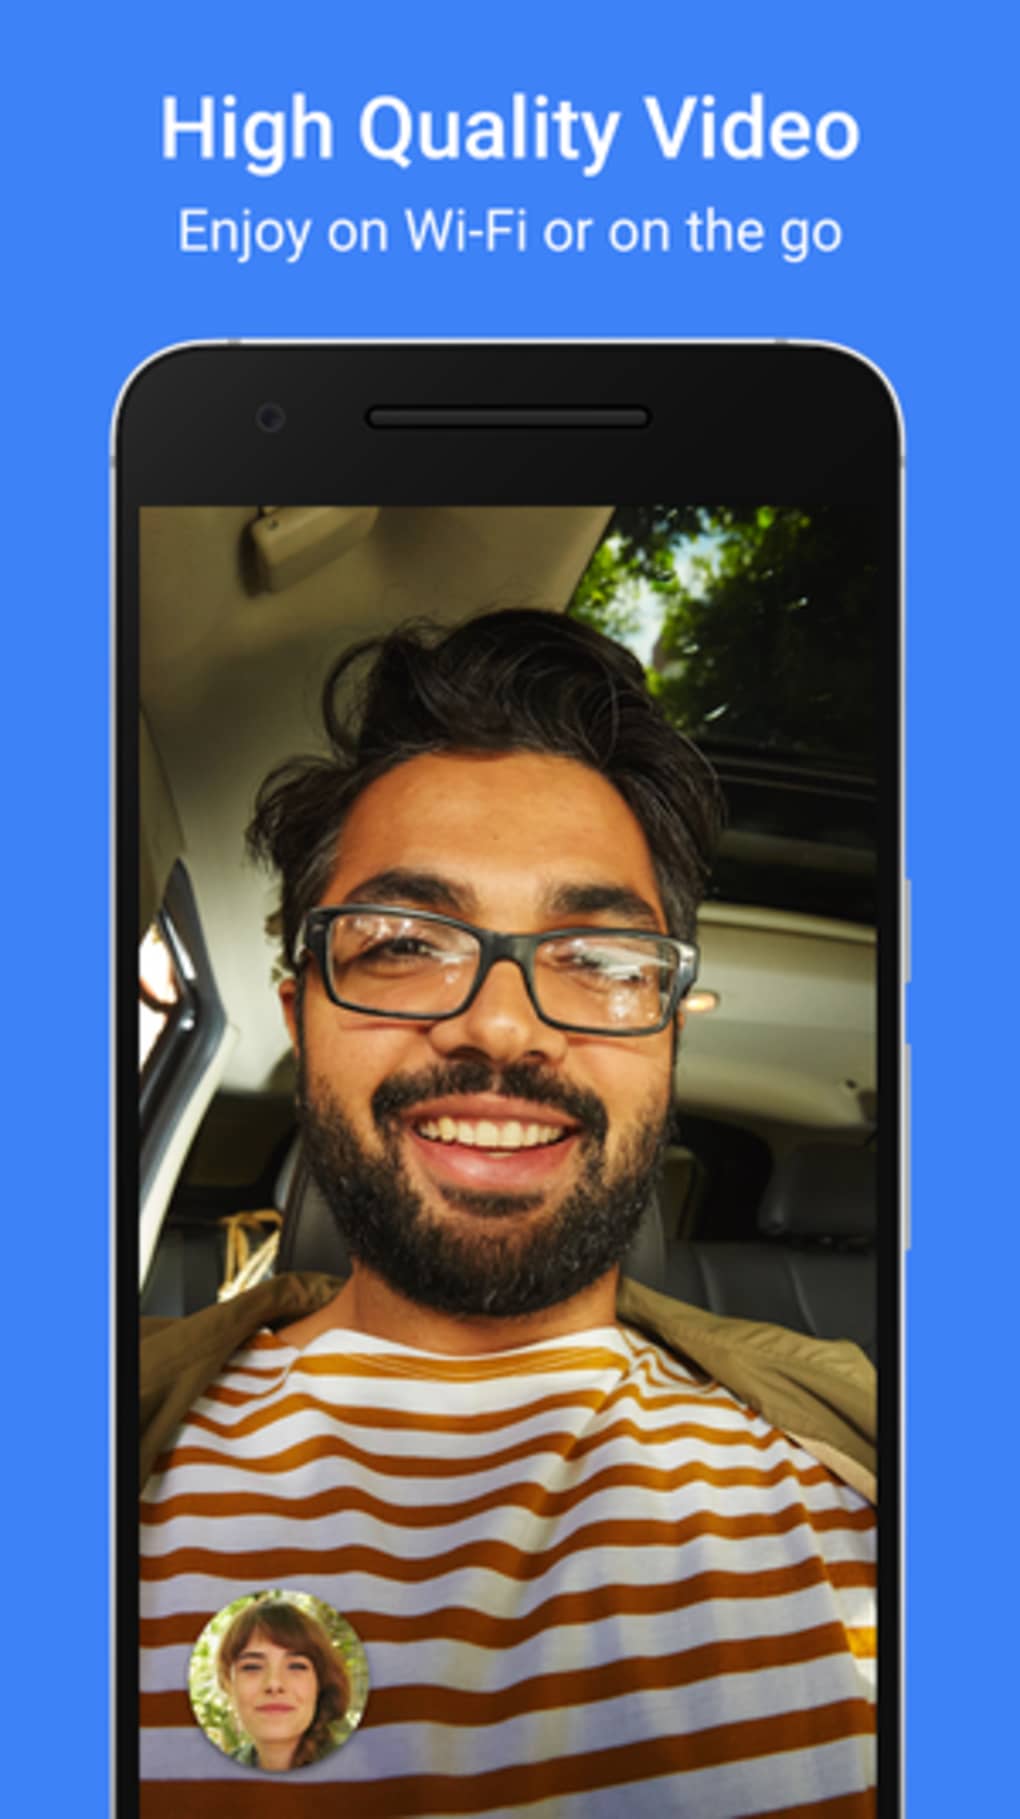 google duo app install for iphone